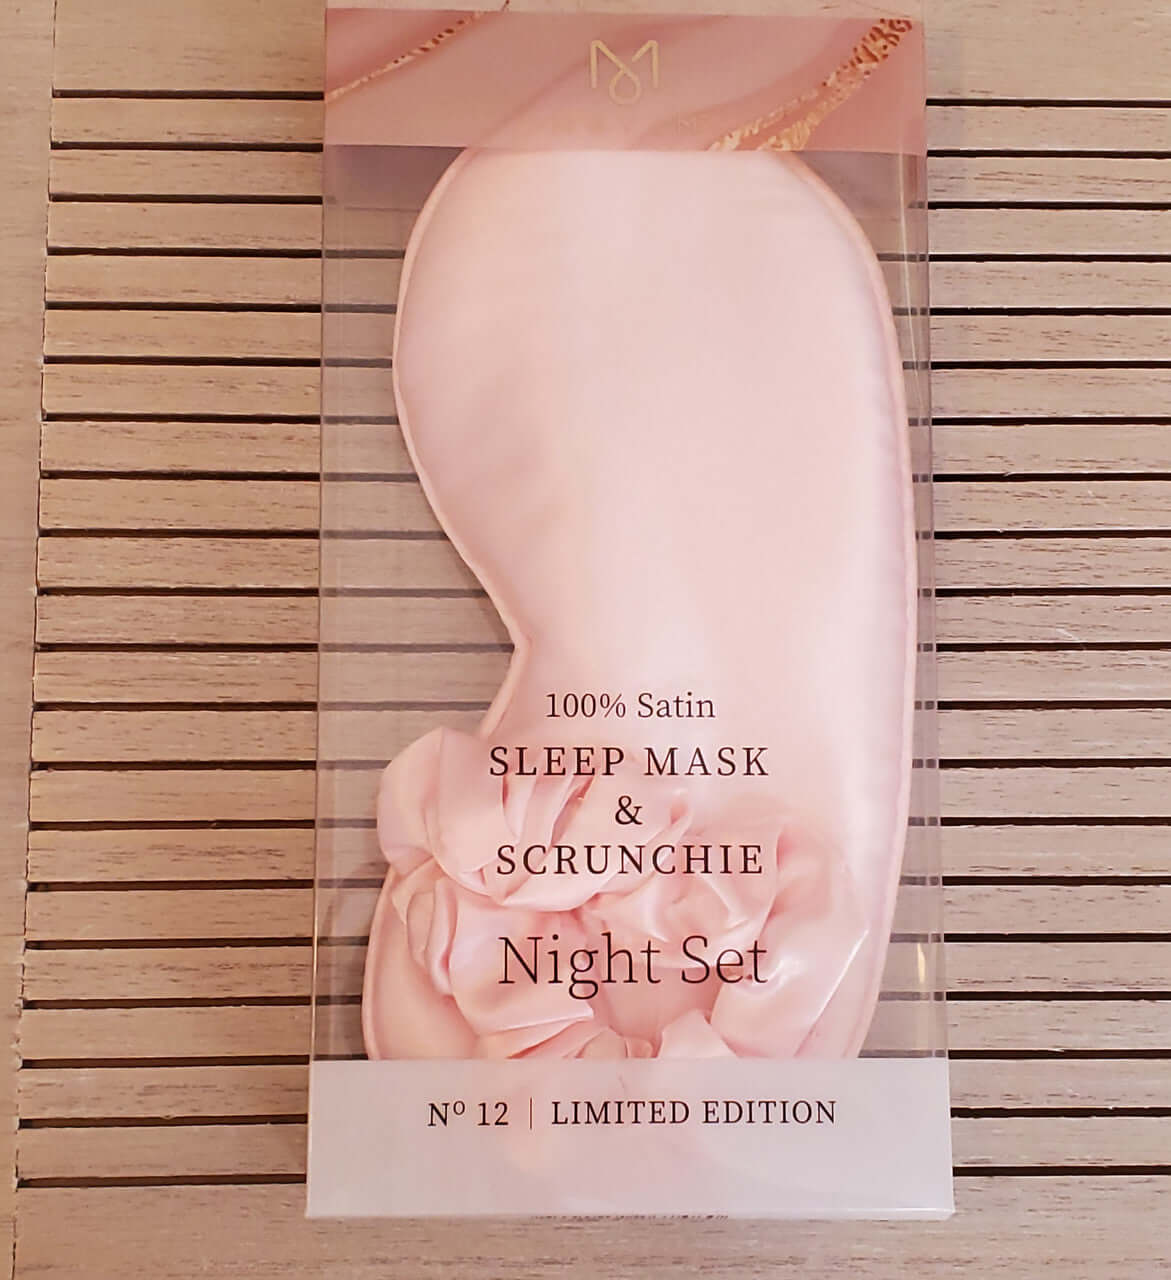 Fashion set, night mask pink color lady's accessories